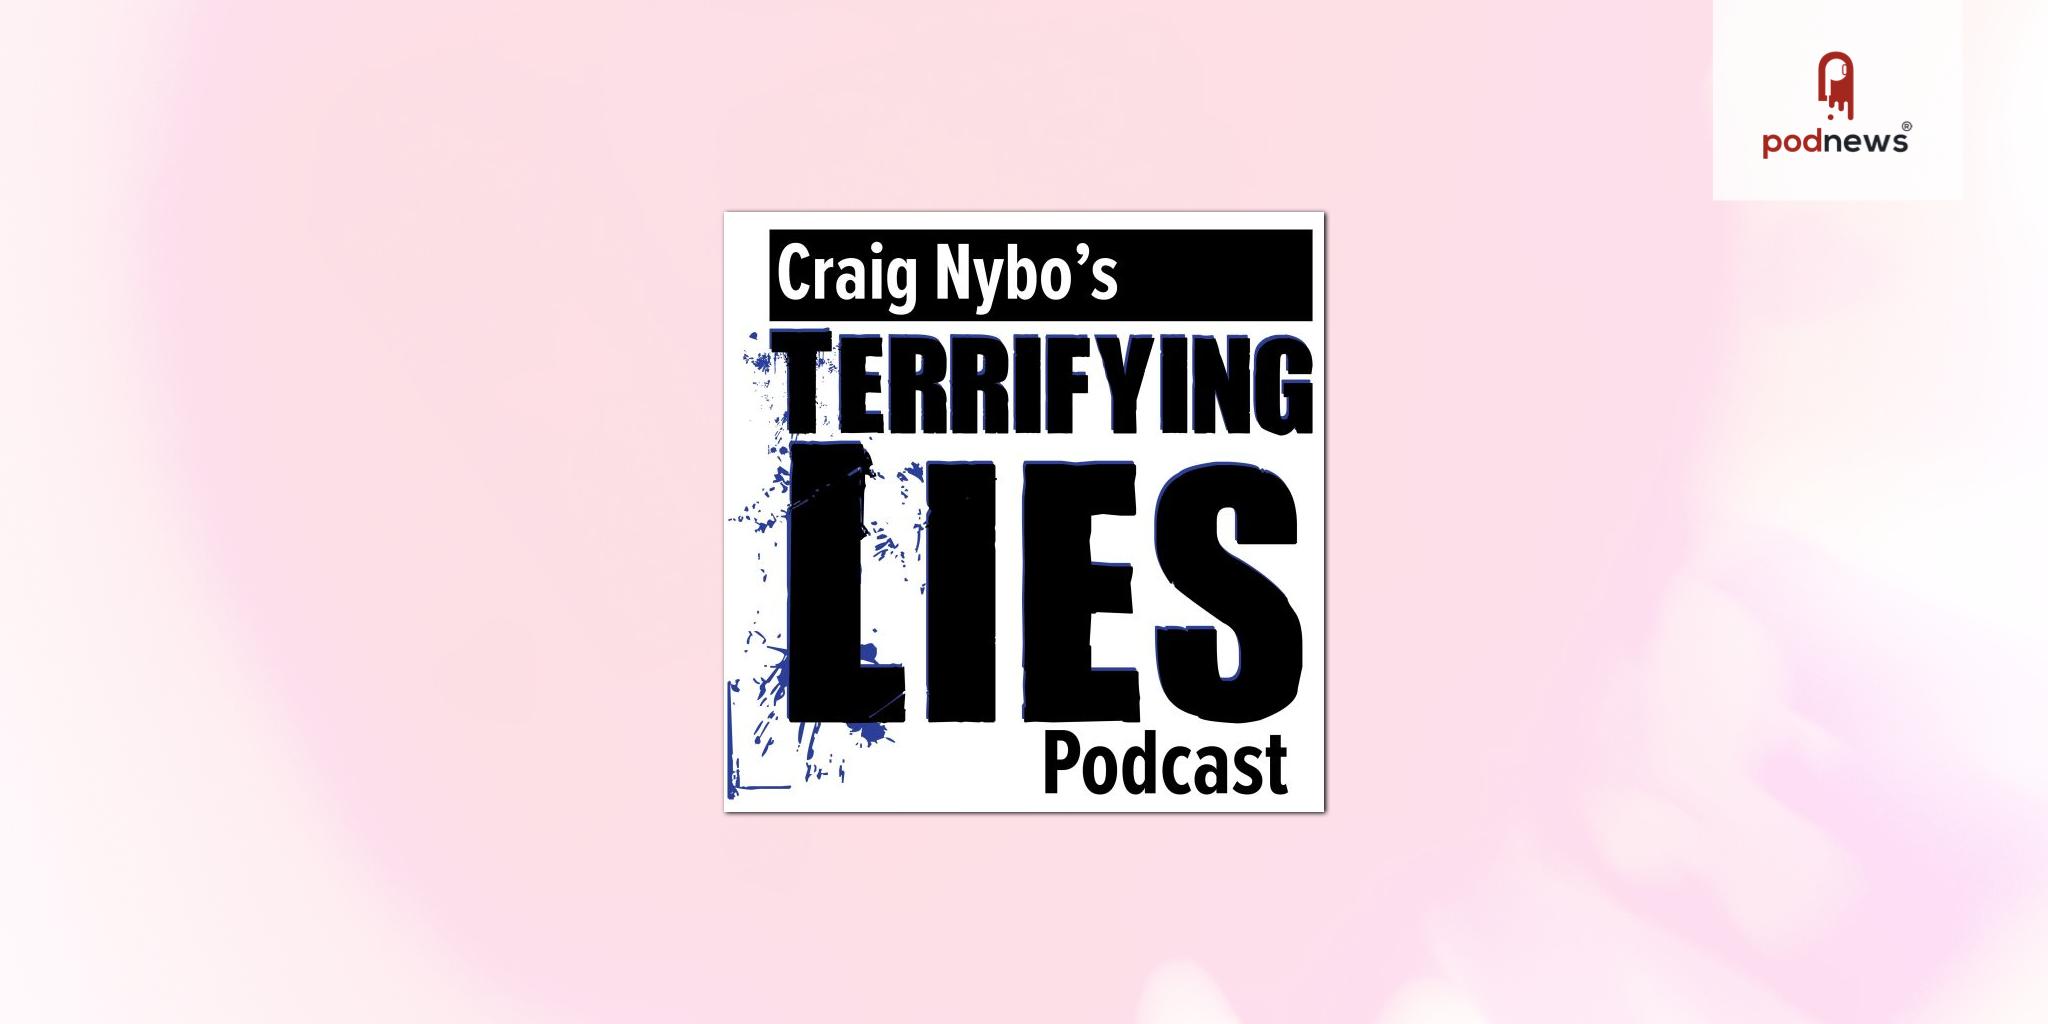 The Terrifying Lies Podcast Launches its Second Season